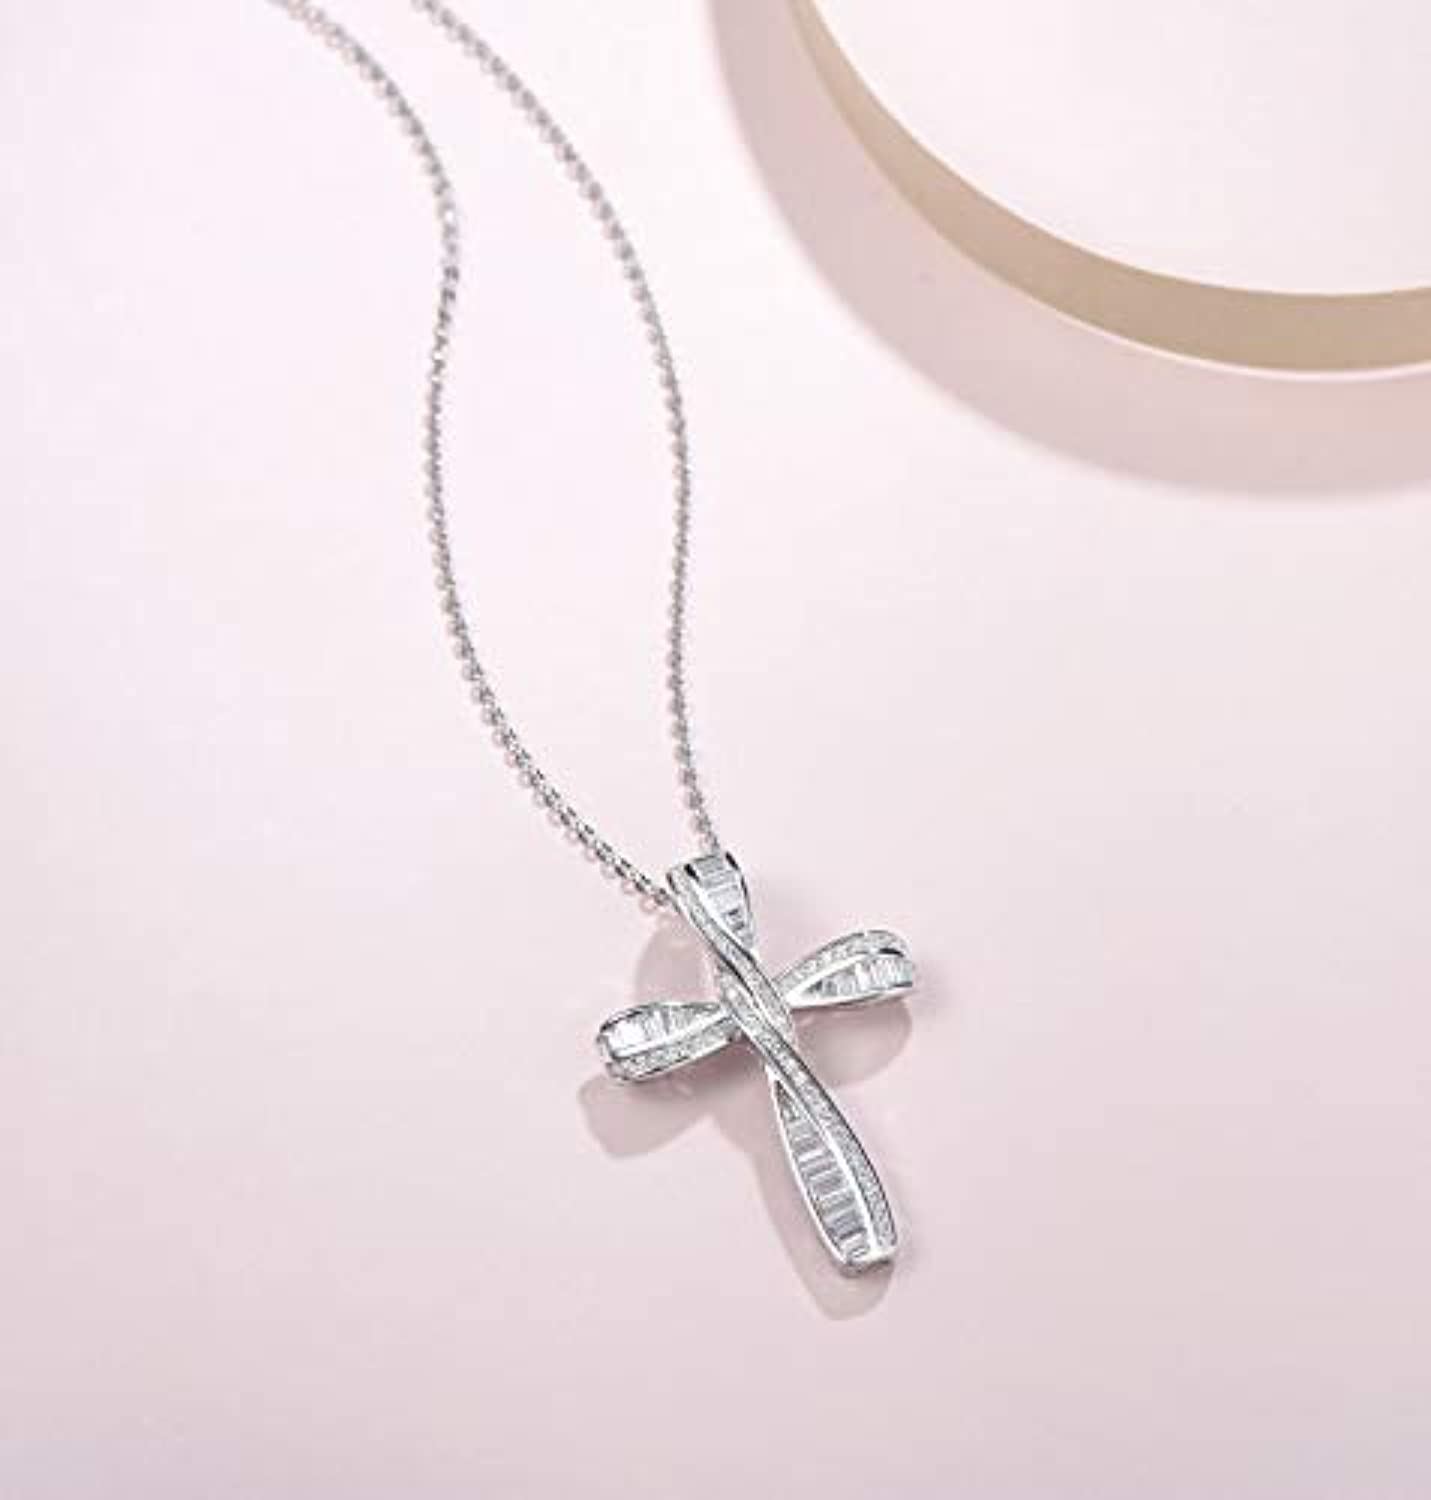 Premium 925 Sterling Silver Cross Necklace